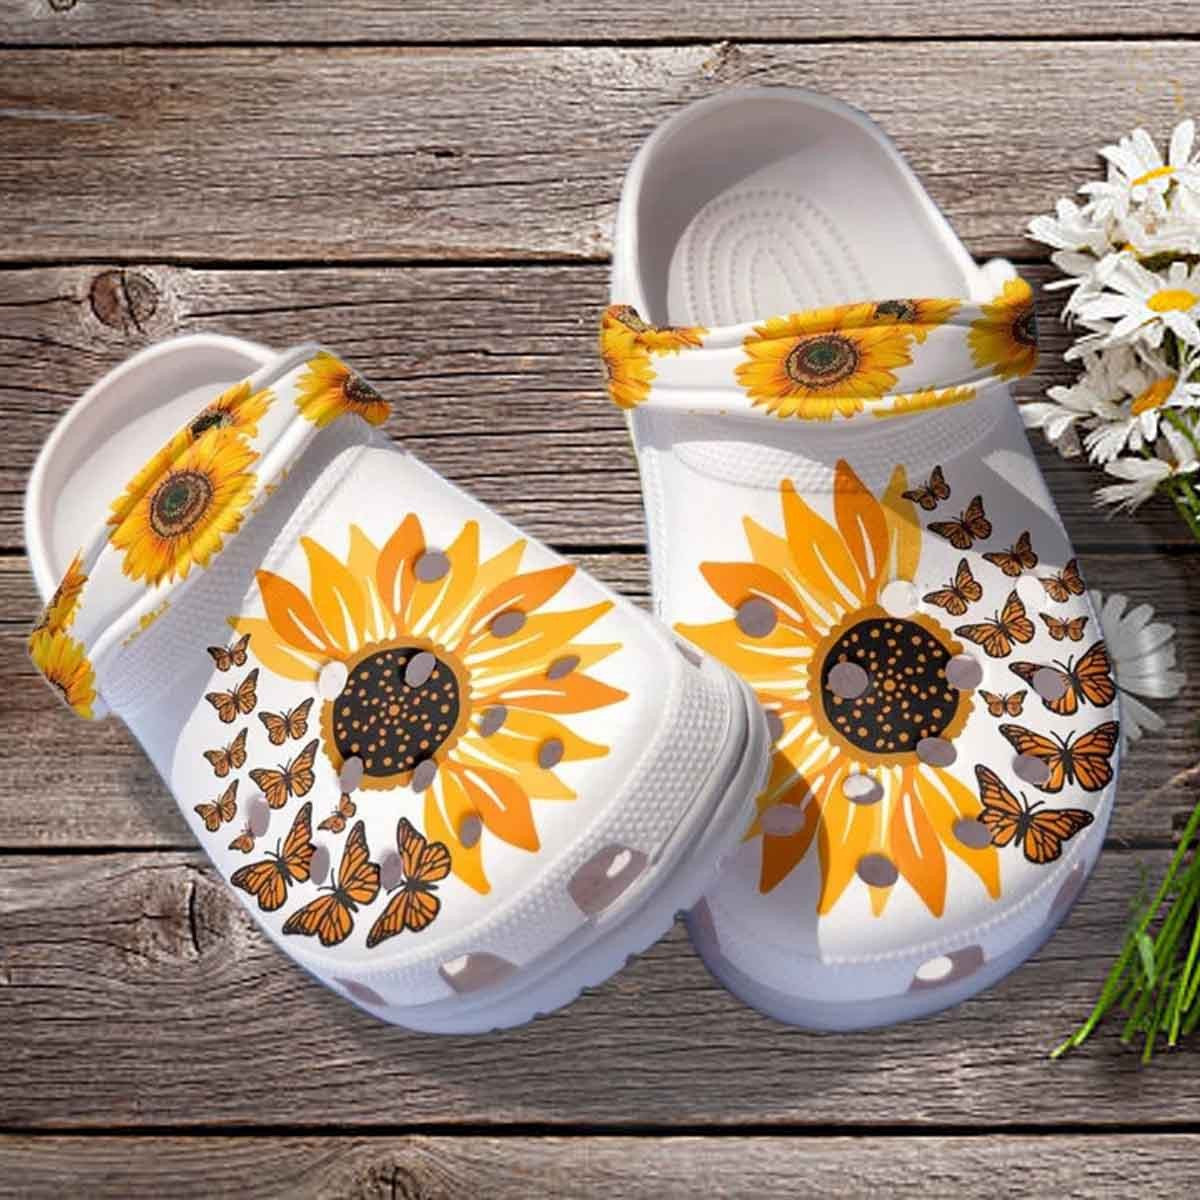 Be Kind Sunflower Butterfly Shoes Clogs Crocs - Sunflower Shoes Birthday Gift For Daughter